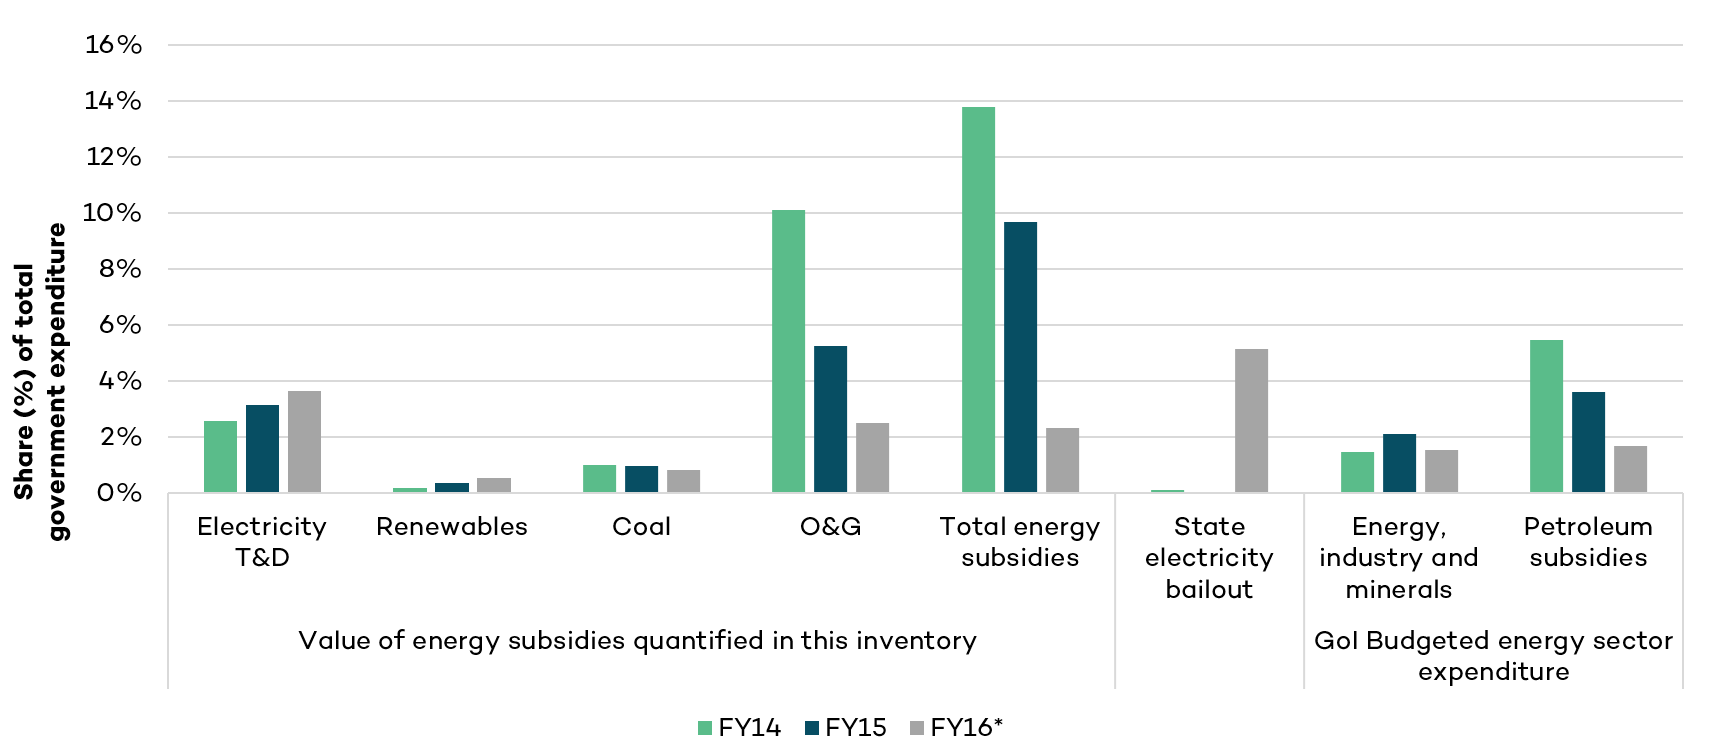 Value of energy subsidies quantified by GSI-IFC-ODI and energy subsidies reported by the Government of India